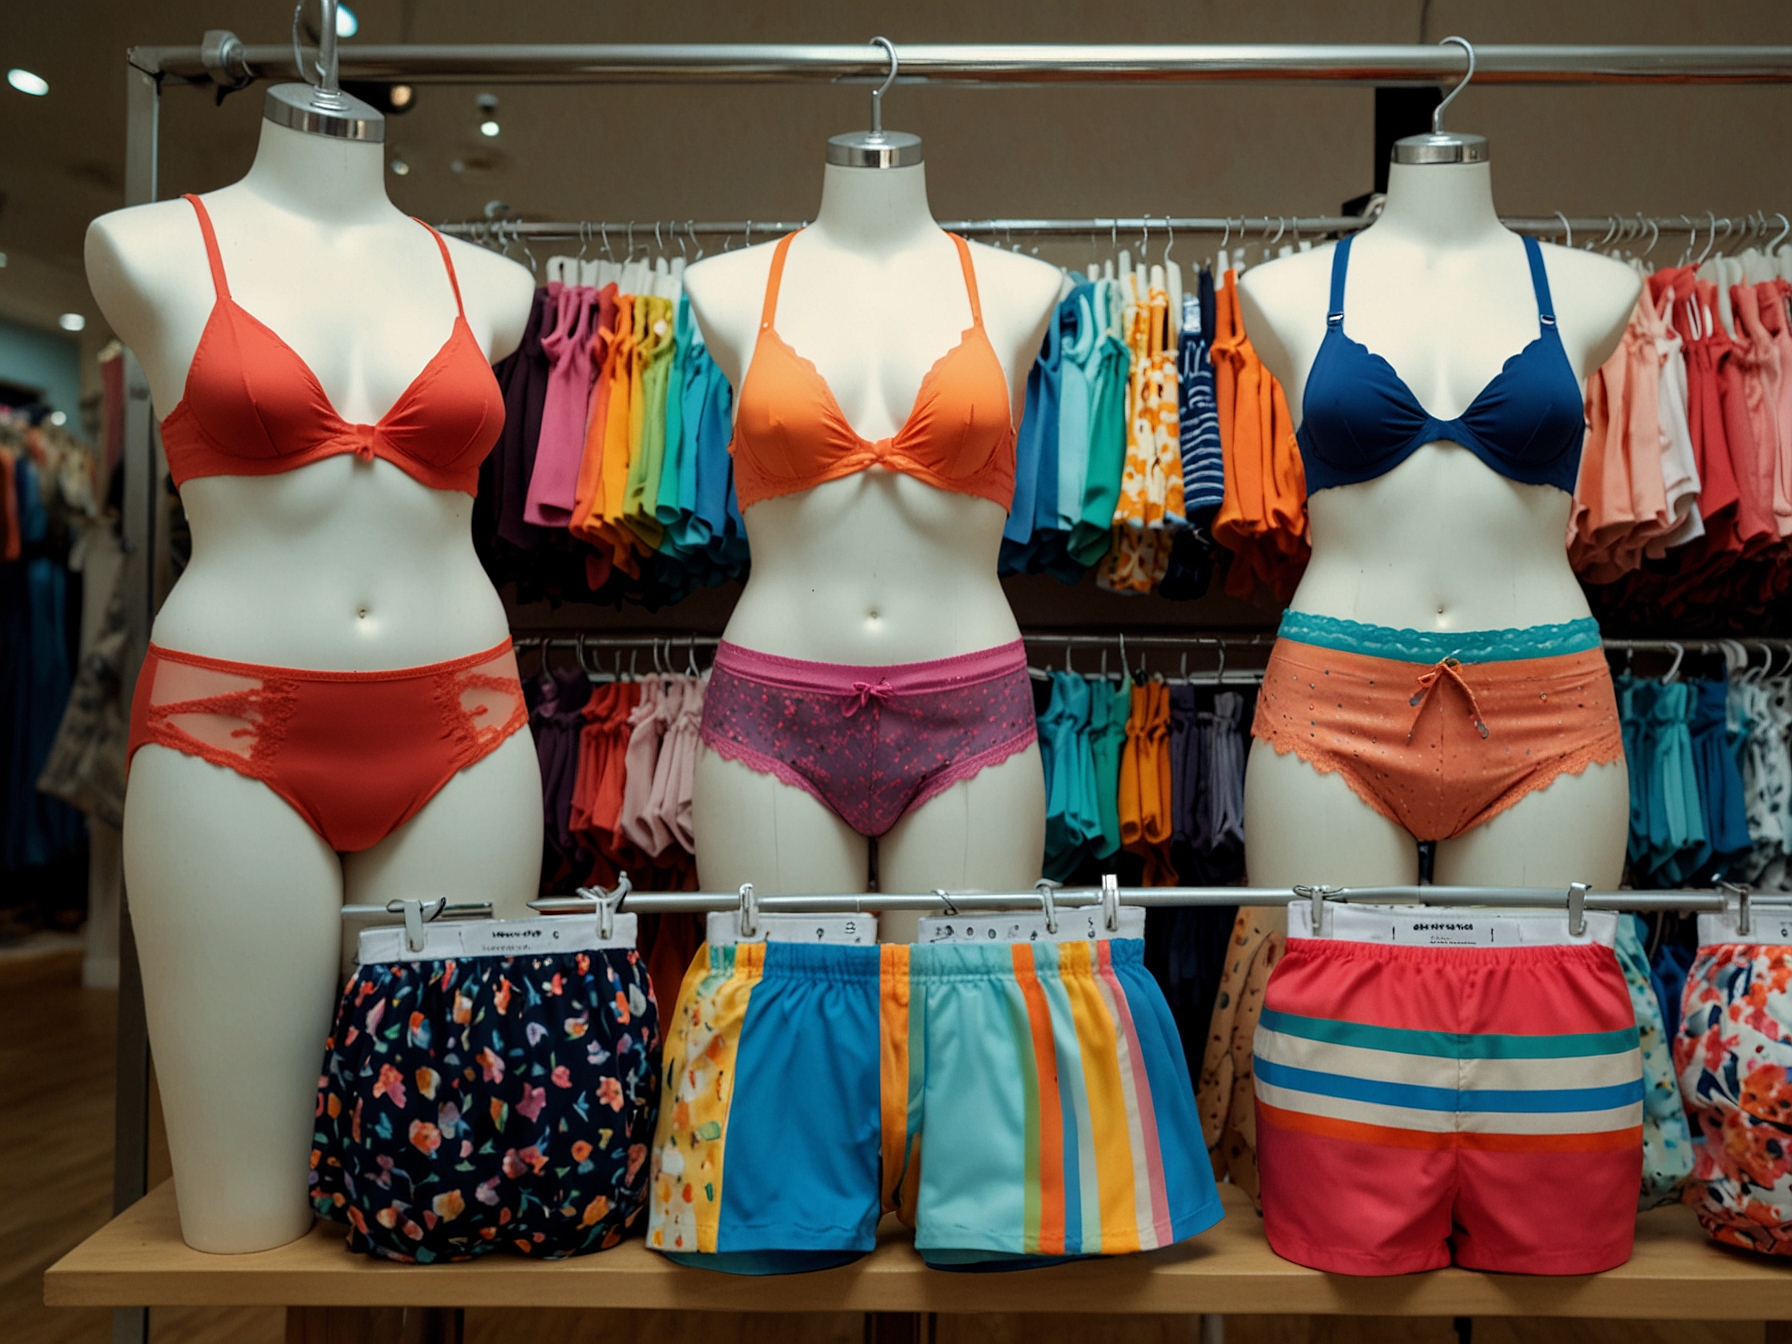 A vibrant display of Primark's new £7 undie sets in various colors and styles, showcasing their versatility as both underwear and swimwear alternatives.